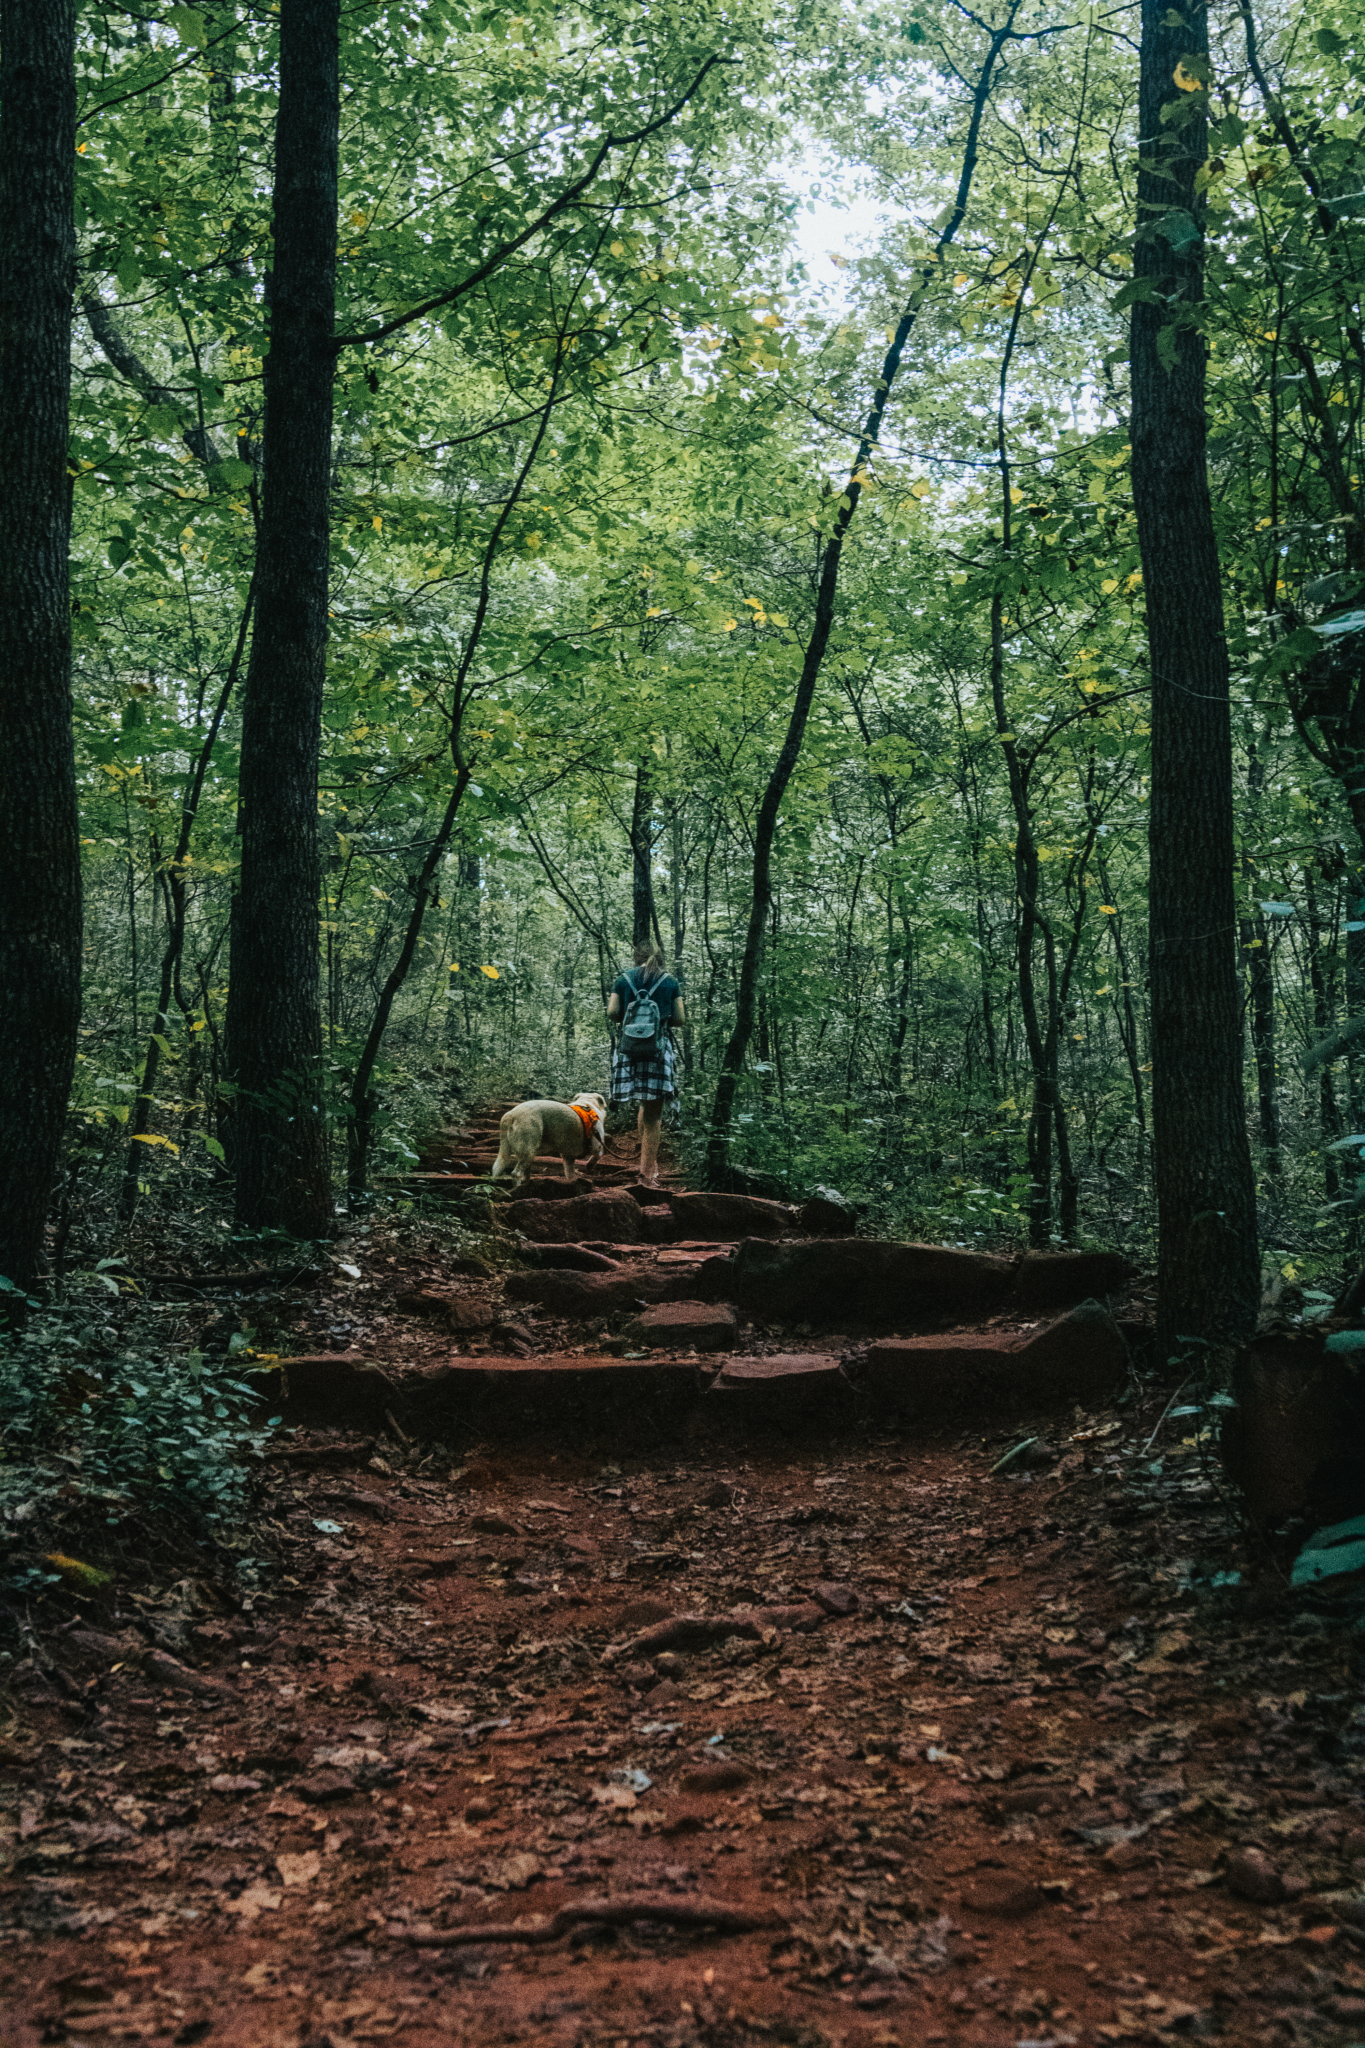 Ruffner Mountain 2020 8 scaled 5 Birmingham hiking trails you need to check out today for spectacular views, wildlife + more